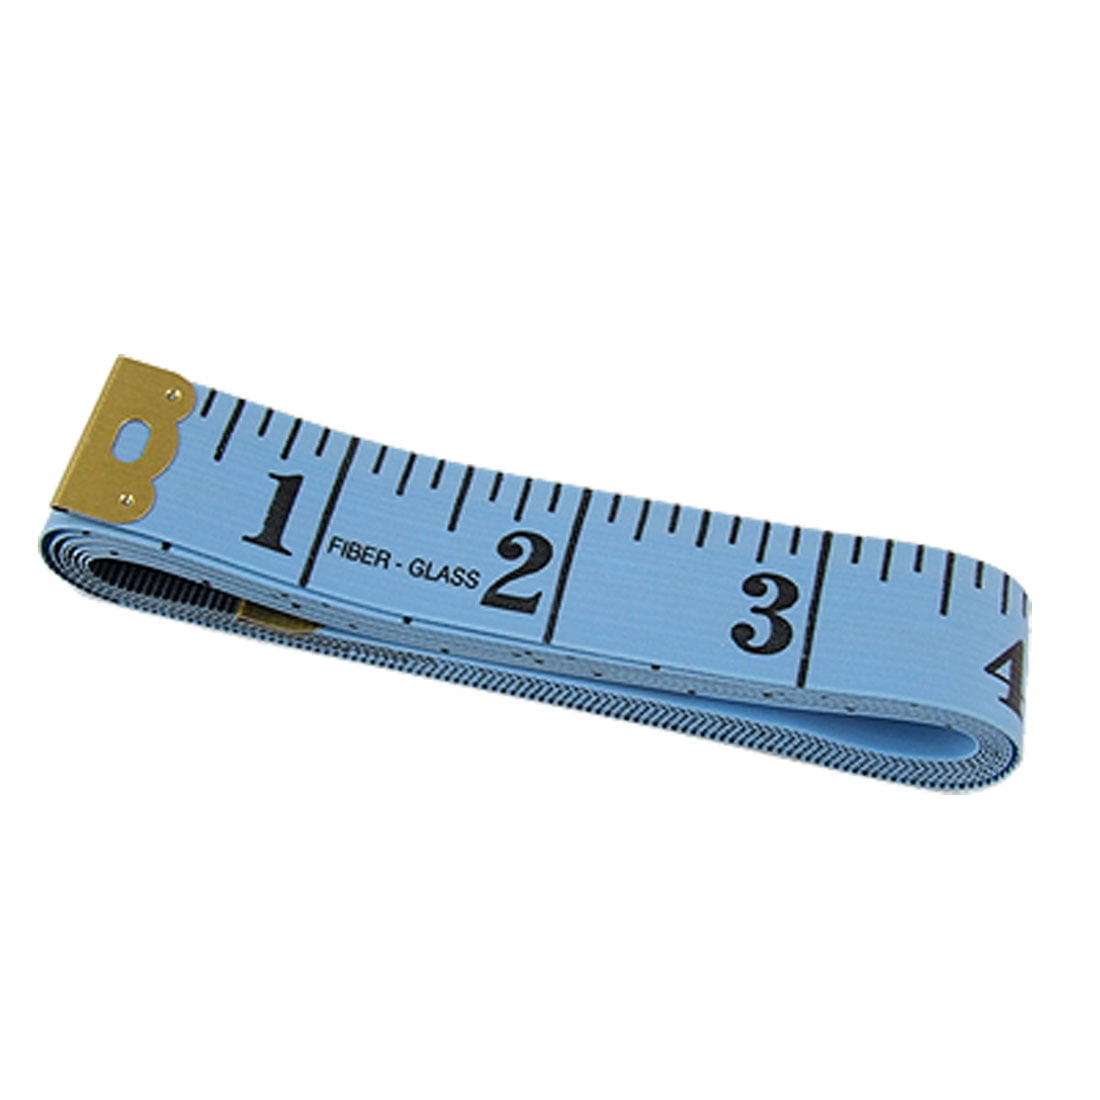 Fiberglass Tape Measure - 60 - Inches/Inches - Colors Vary - WAWAK Sewing  Supplies